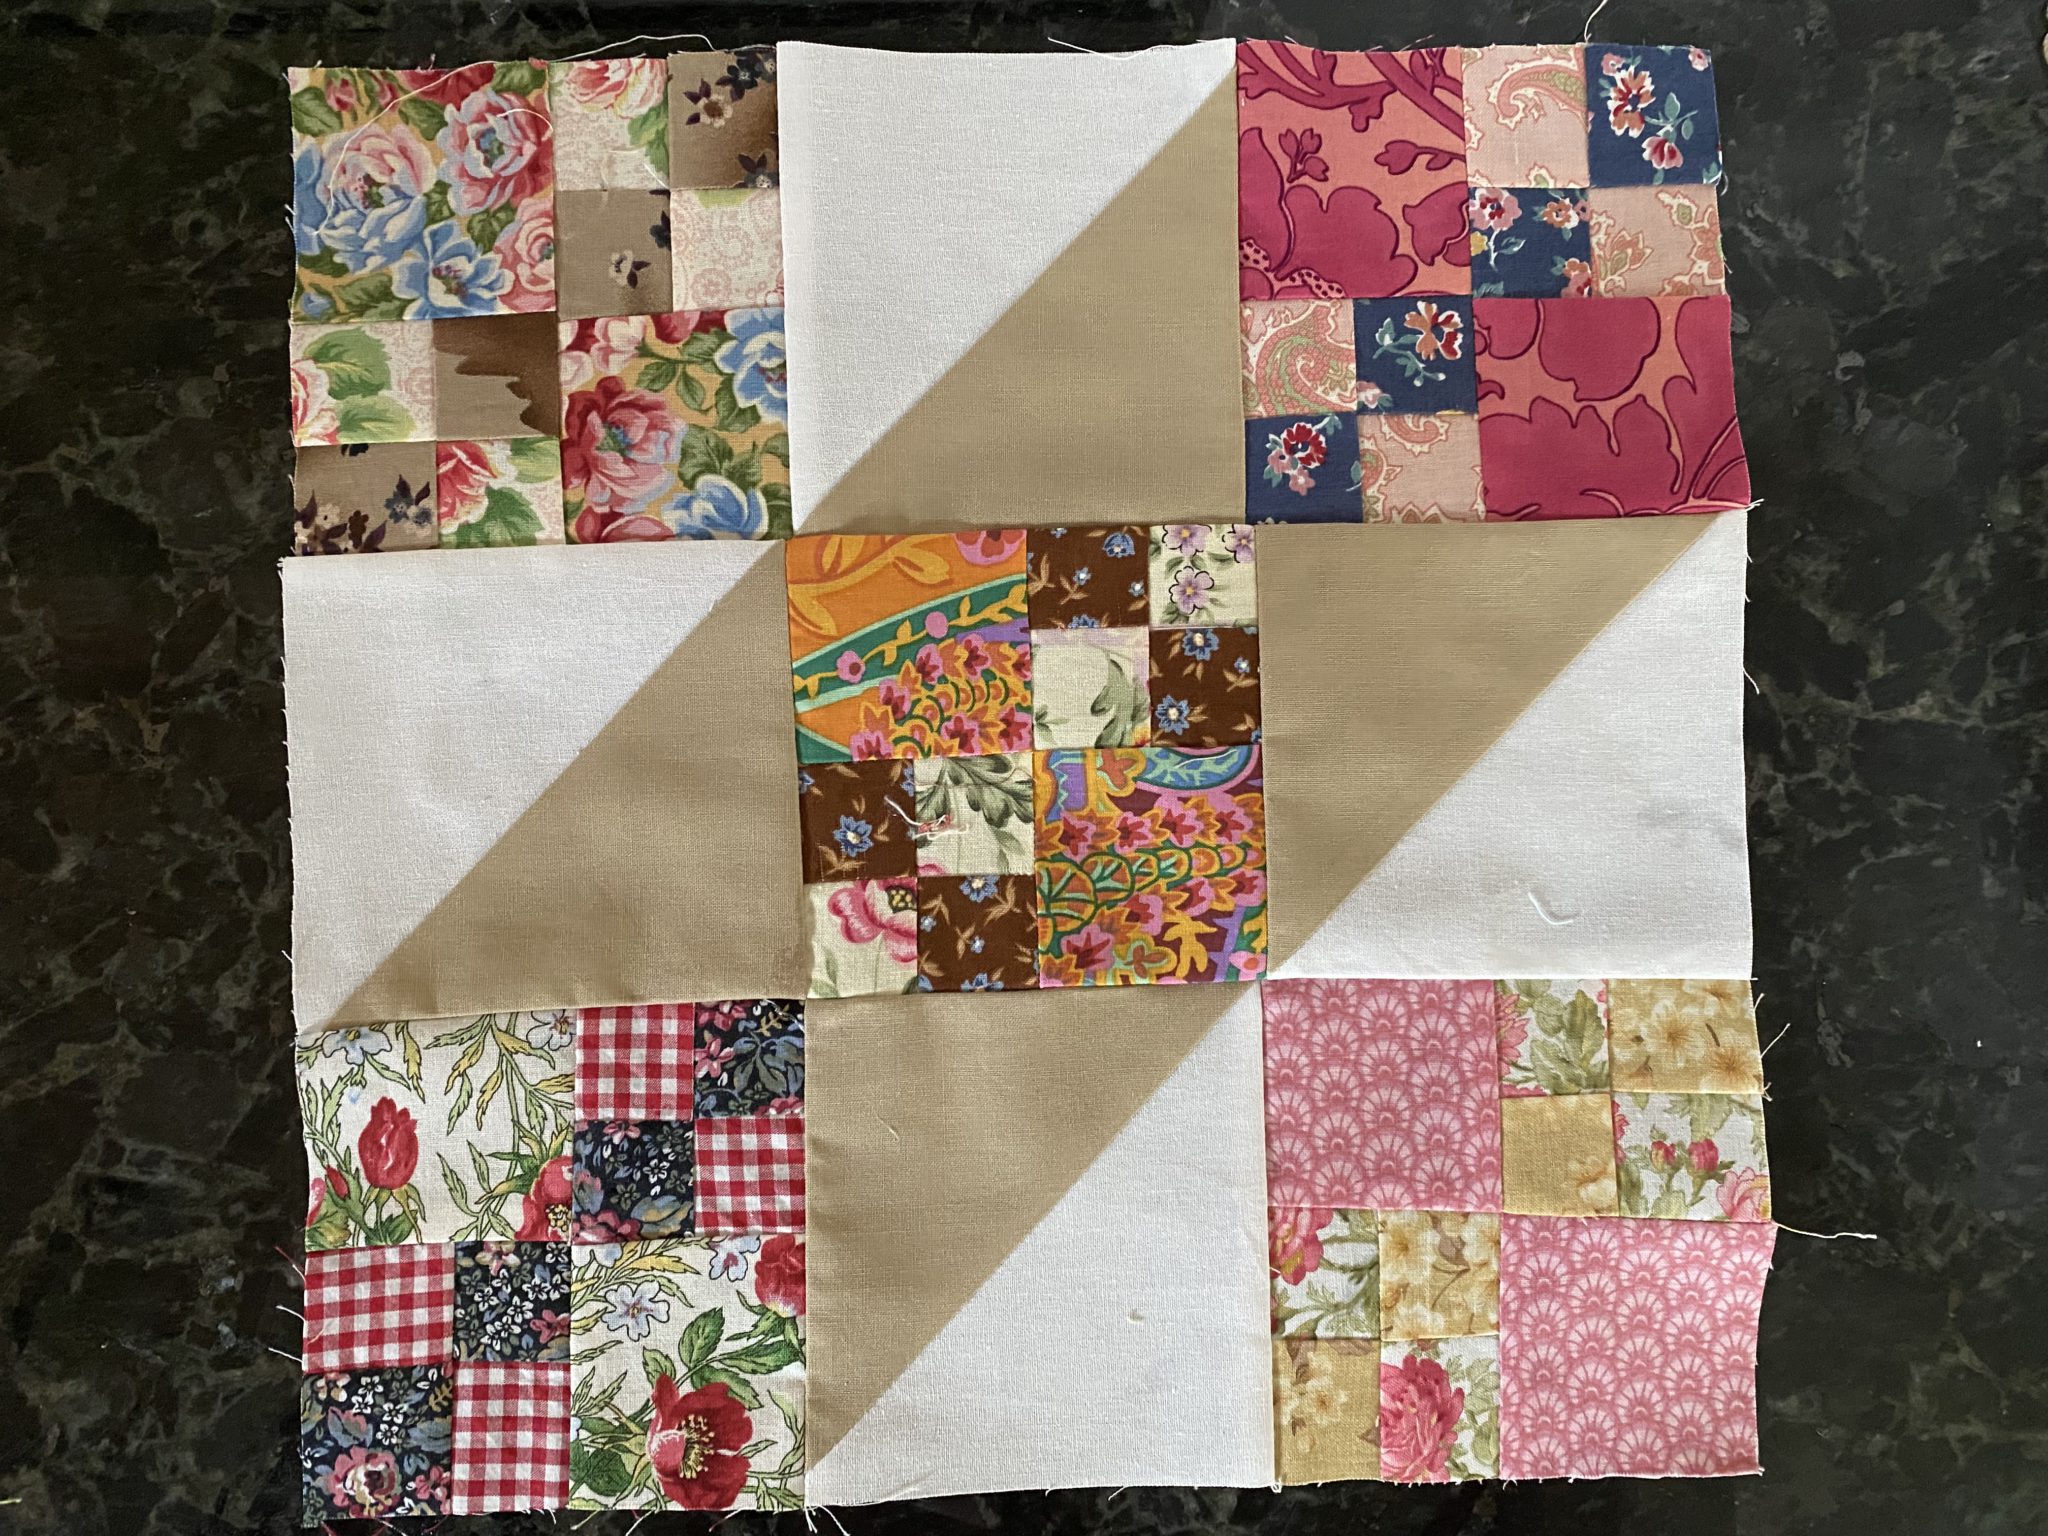 New Scrappy Double Four In Nine Patch Jacobs Ladder Quilt Block Variation susie—scraps.com